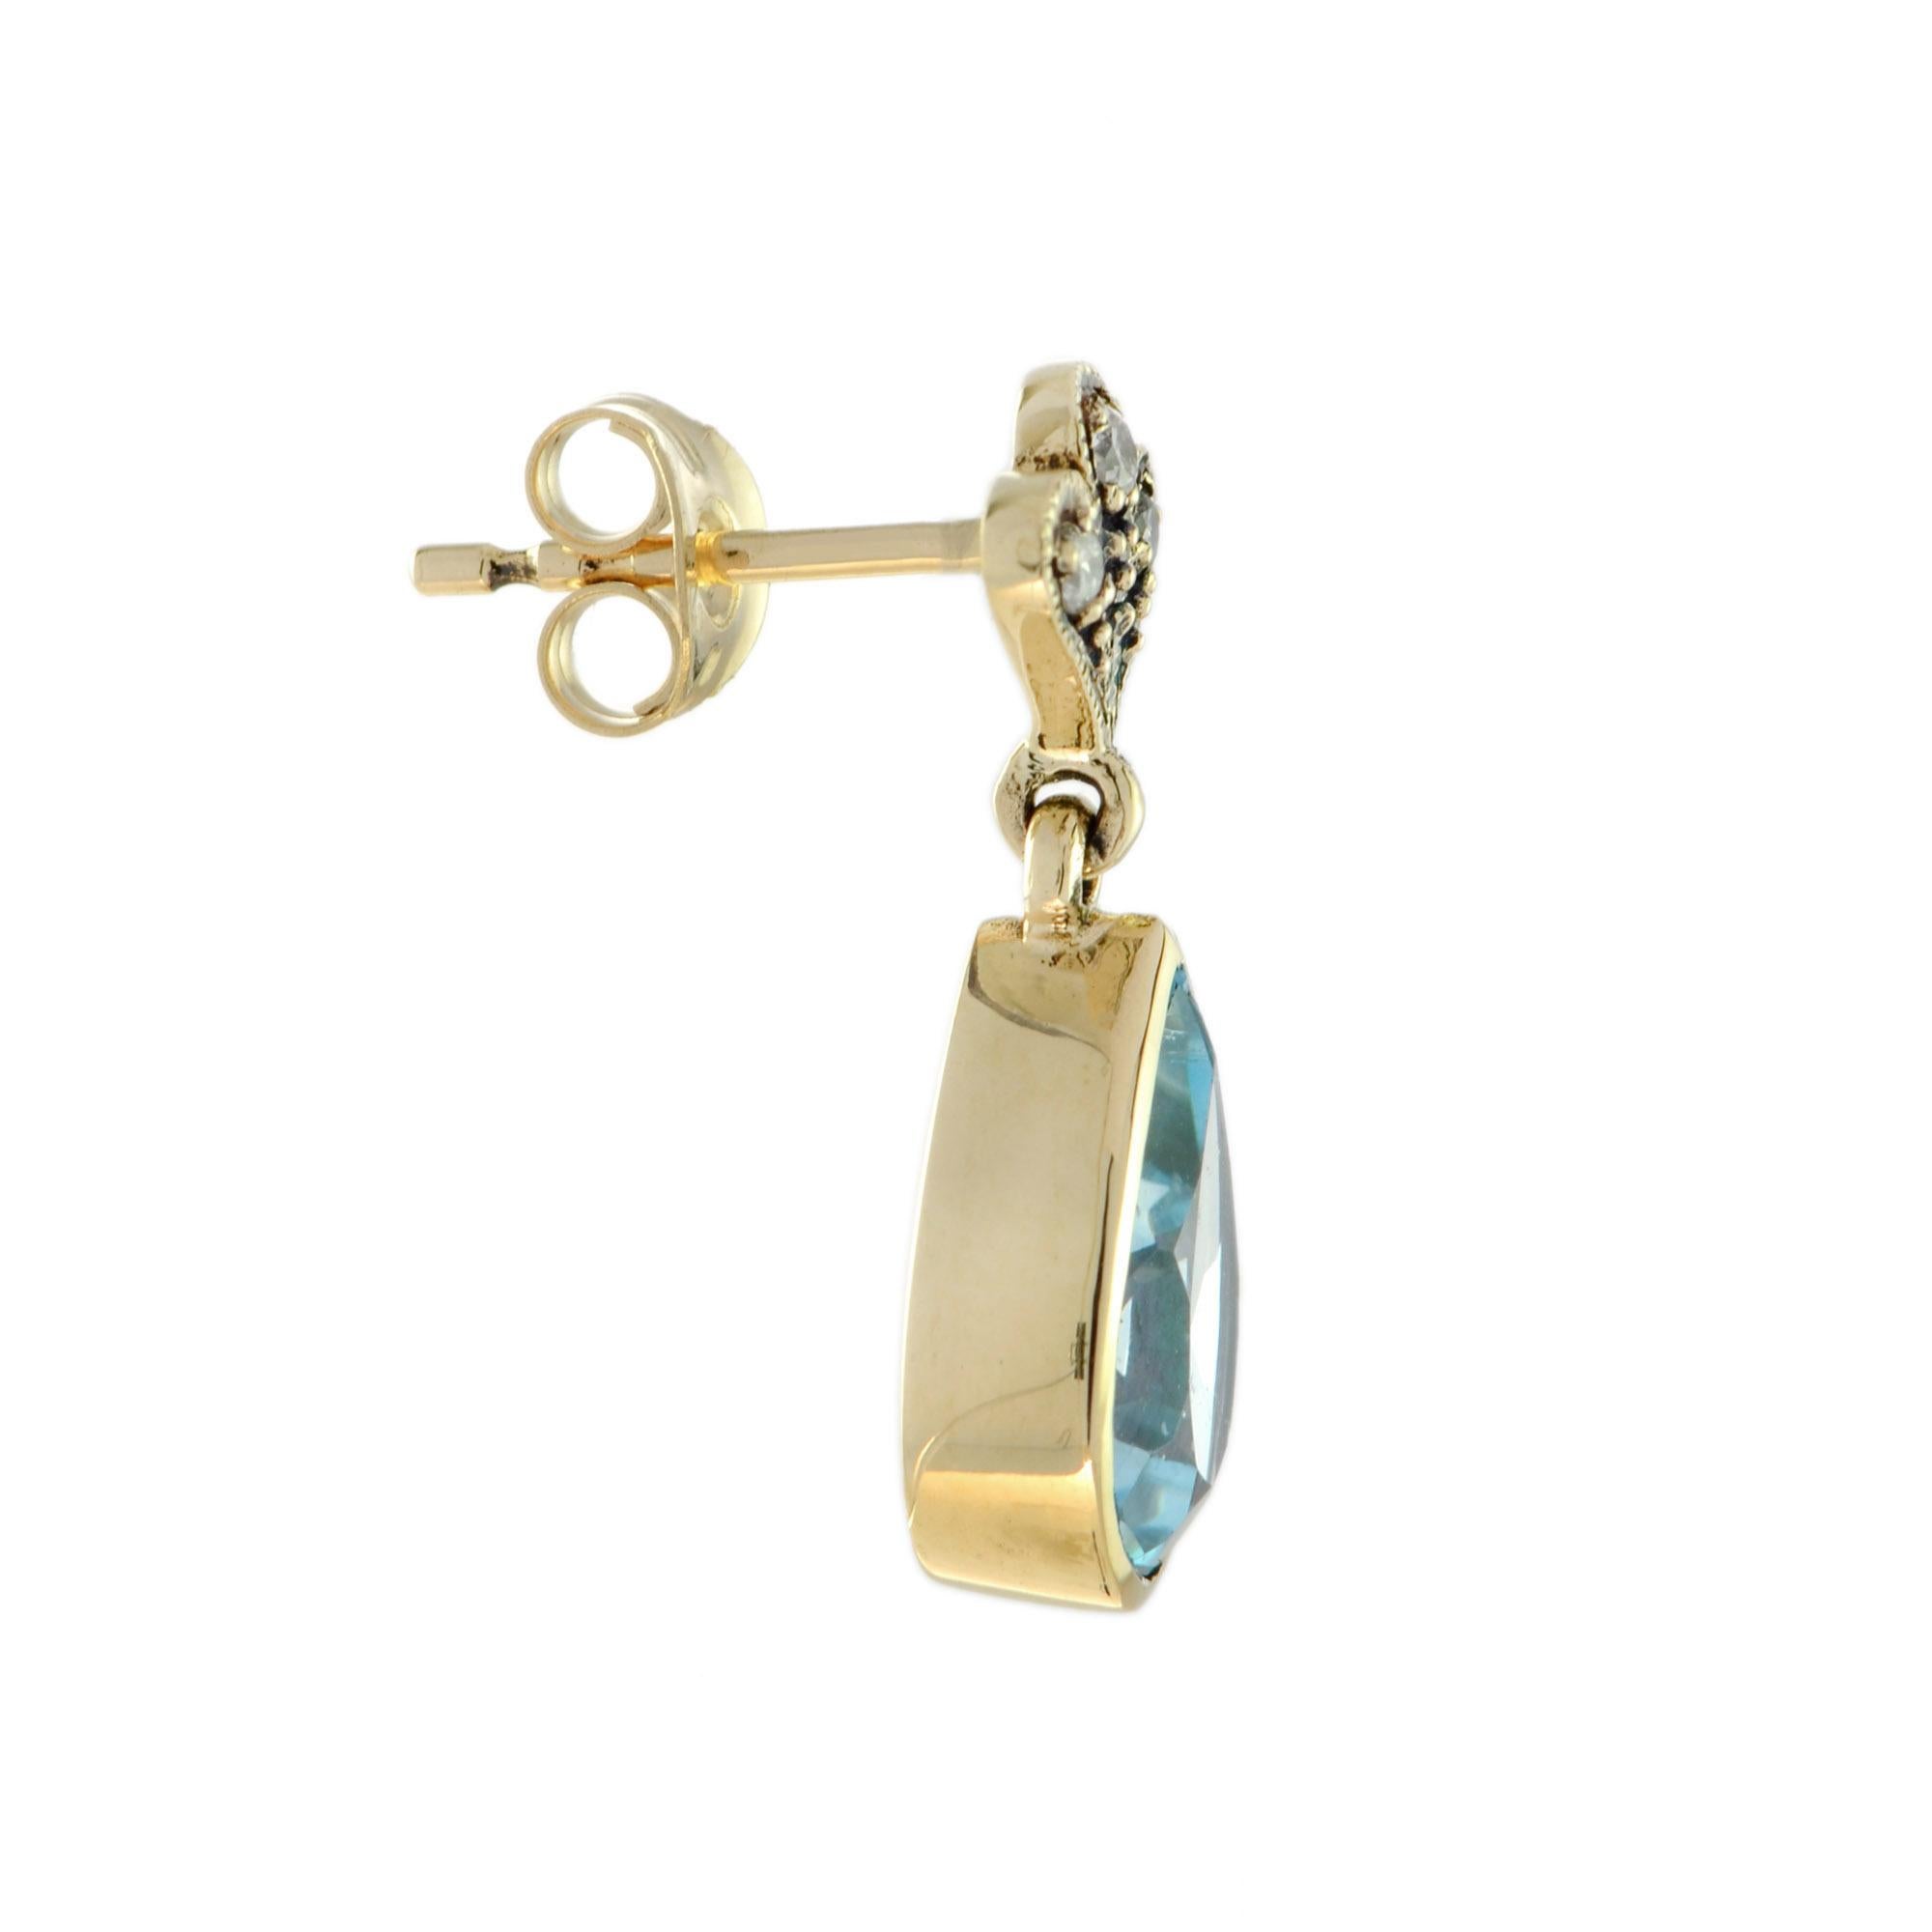 A pair of blue topaz, pear drop shaped dangle earrings. A charismatic way to enhance every ensemble.

Information
Metal: 9K Yellow Gold
Width: 8 mm.
Length: 20 mm.
Weight: 3.48 g. (approx. in total)
Backing: Push Back

Center Gemstones
Type: Blue